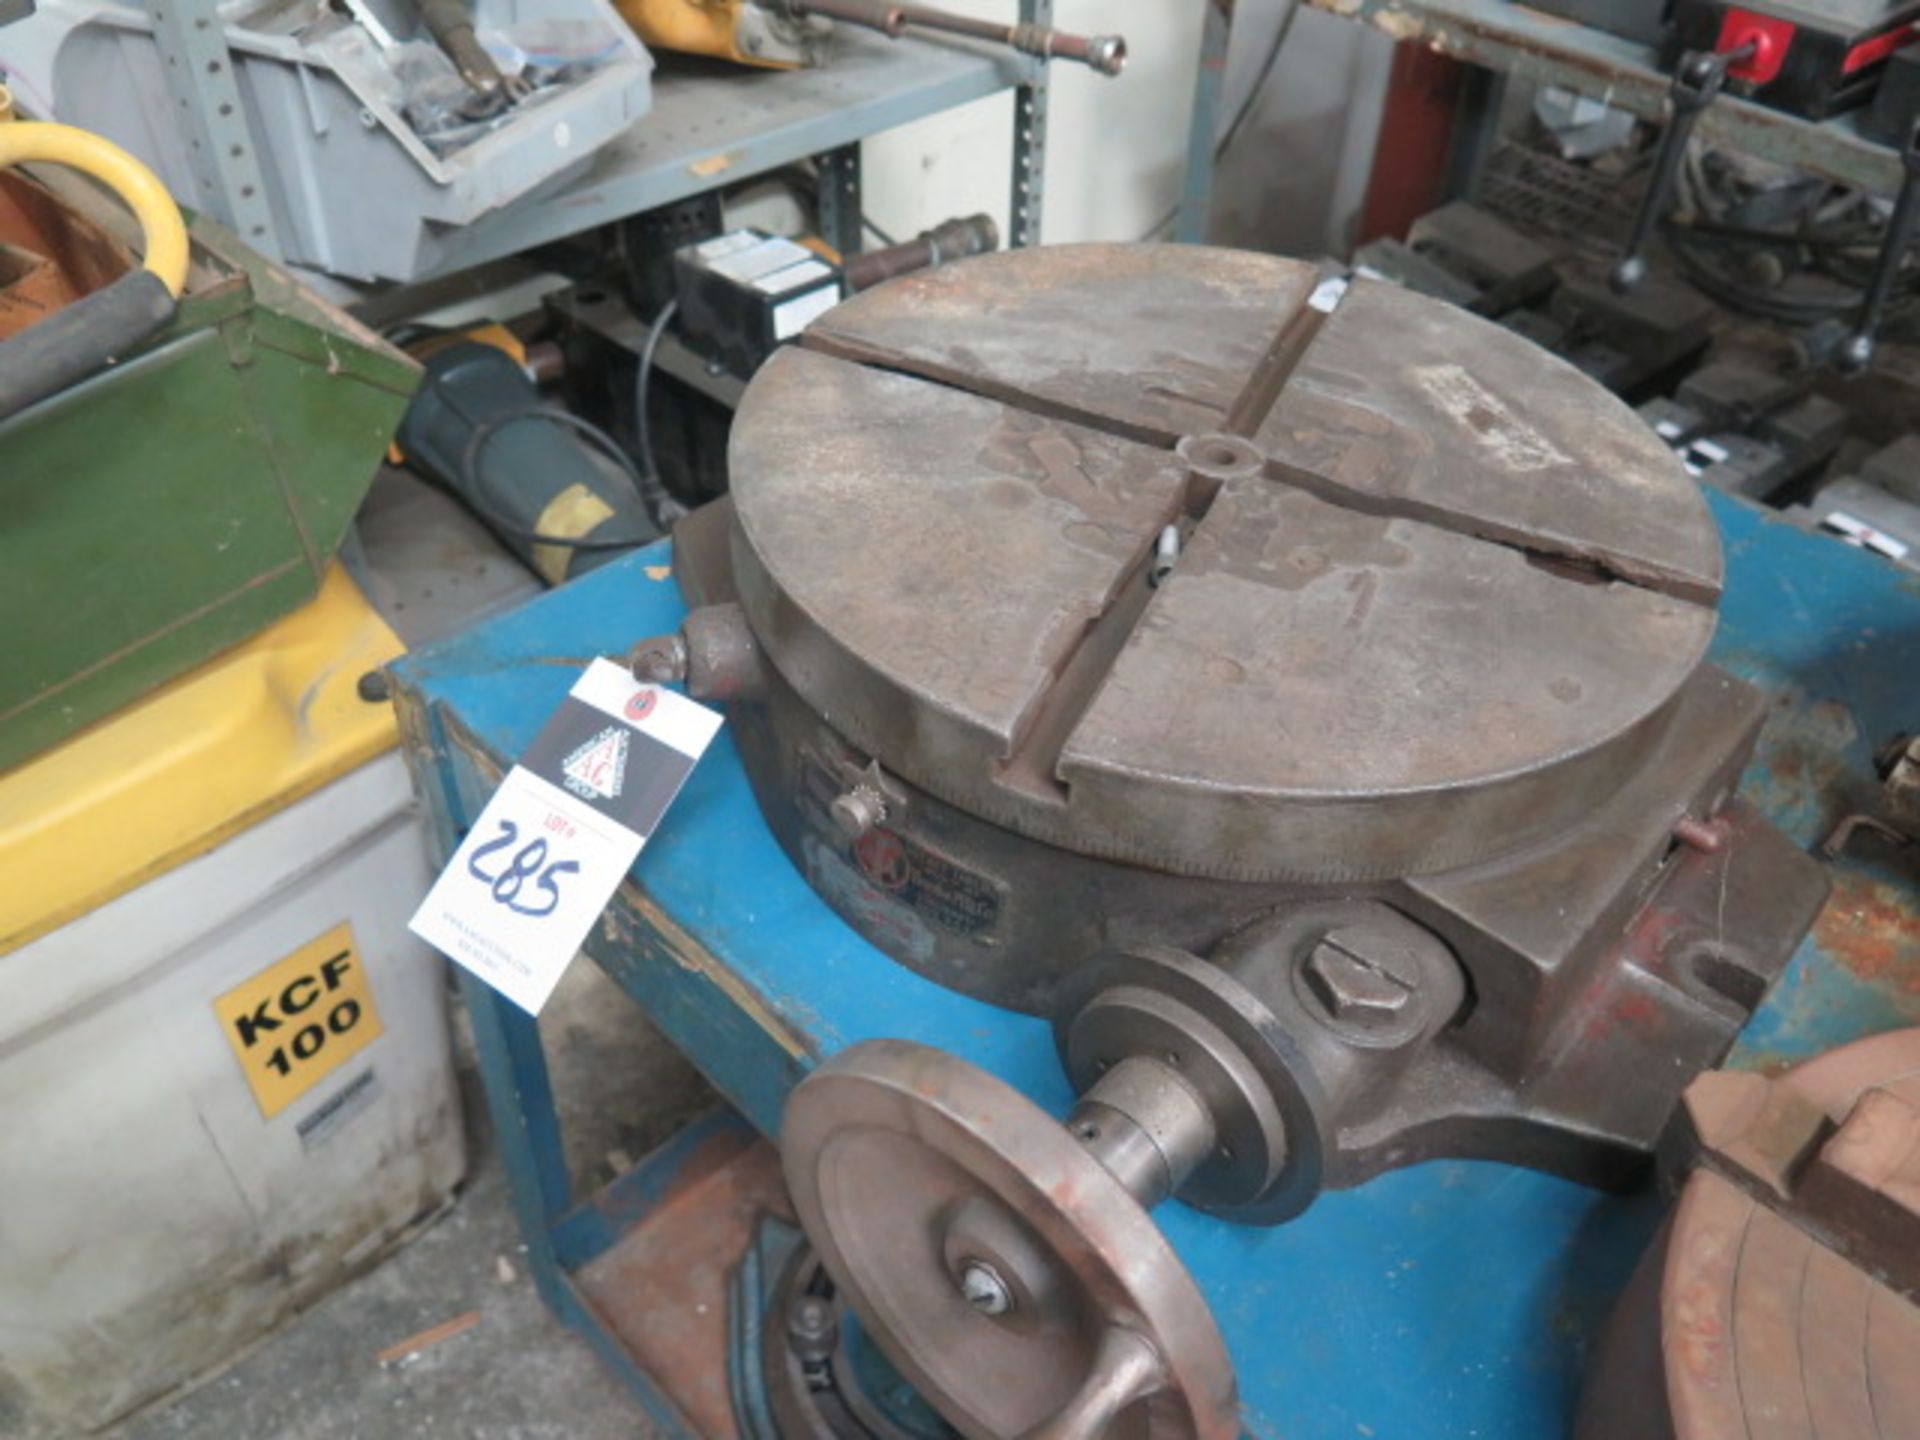 Troyke 15" Rotary Table (SOLD AS-IS - NO WARRANTY) - Image 2 of 4